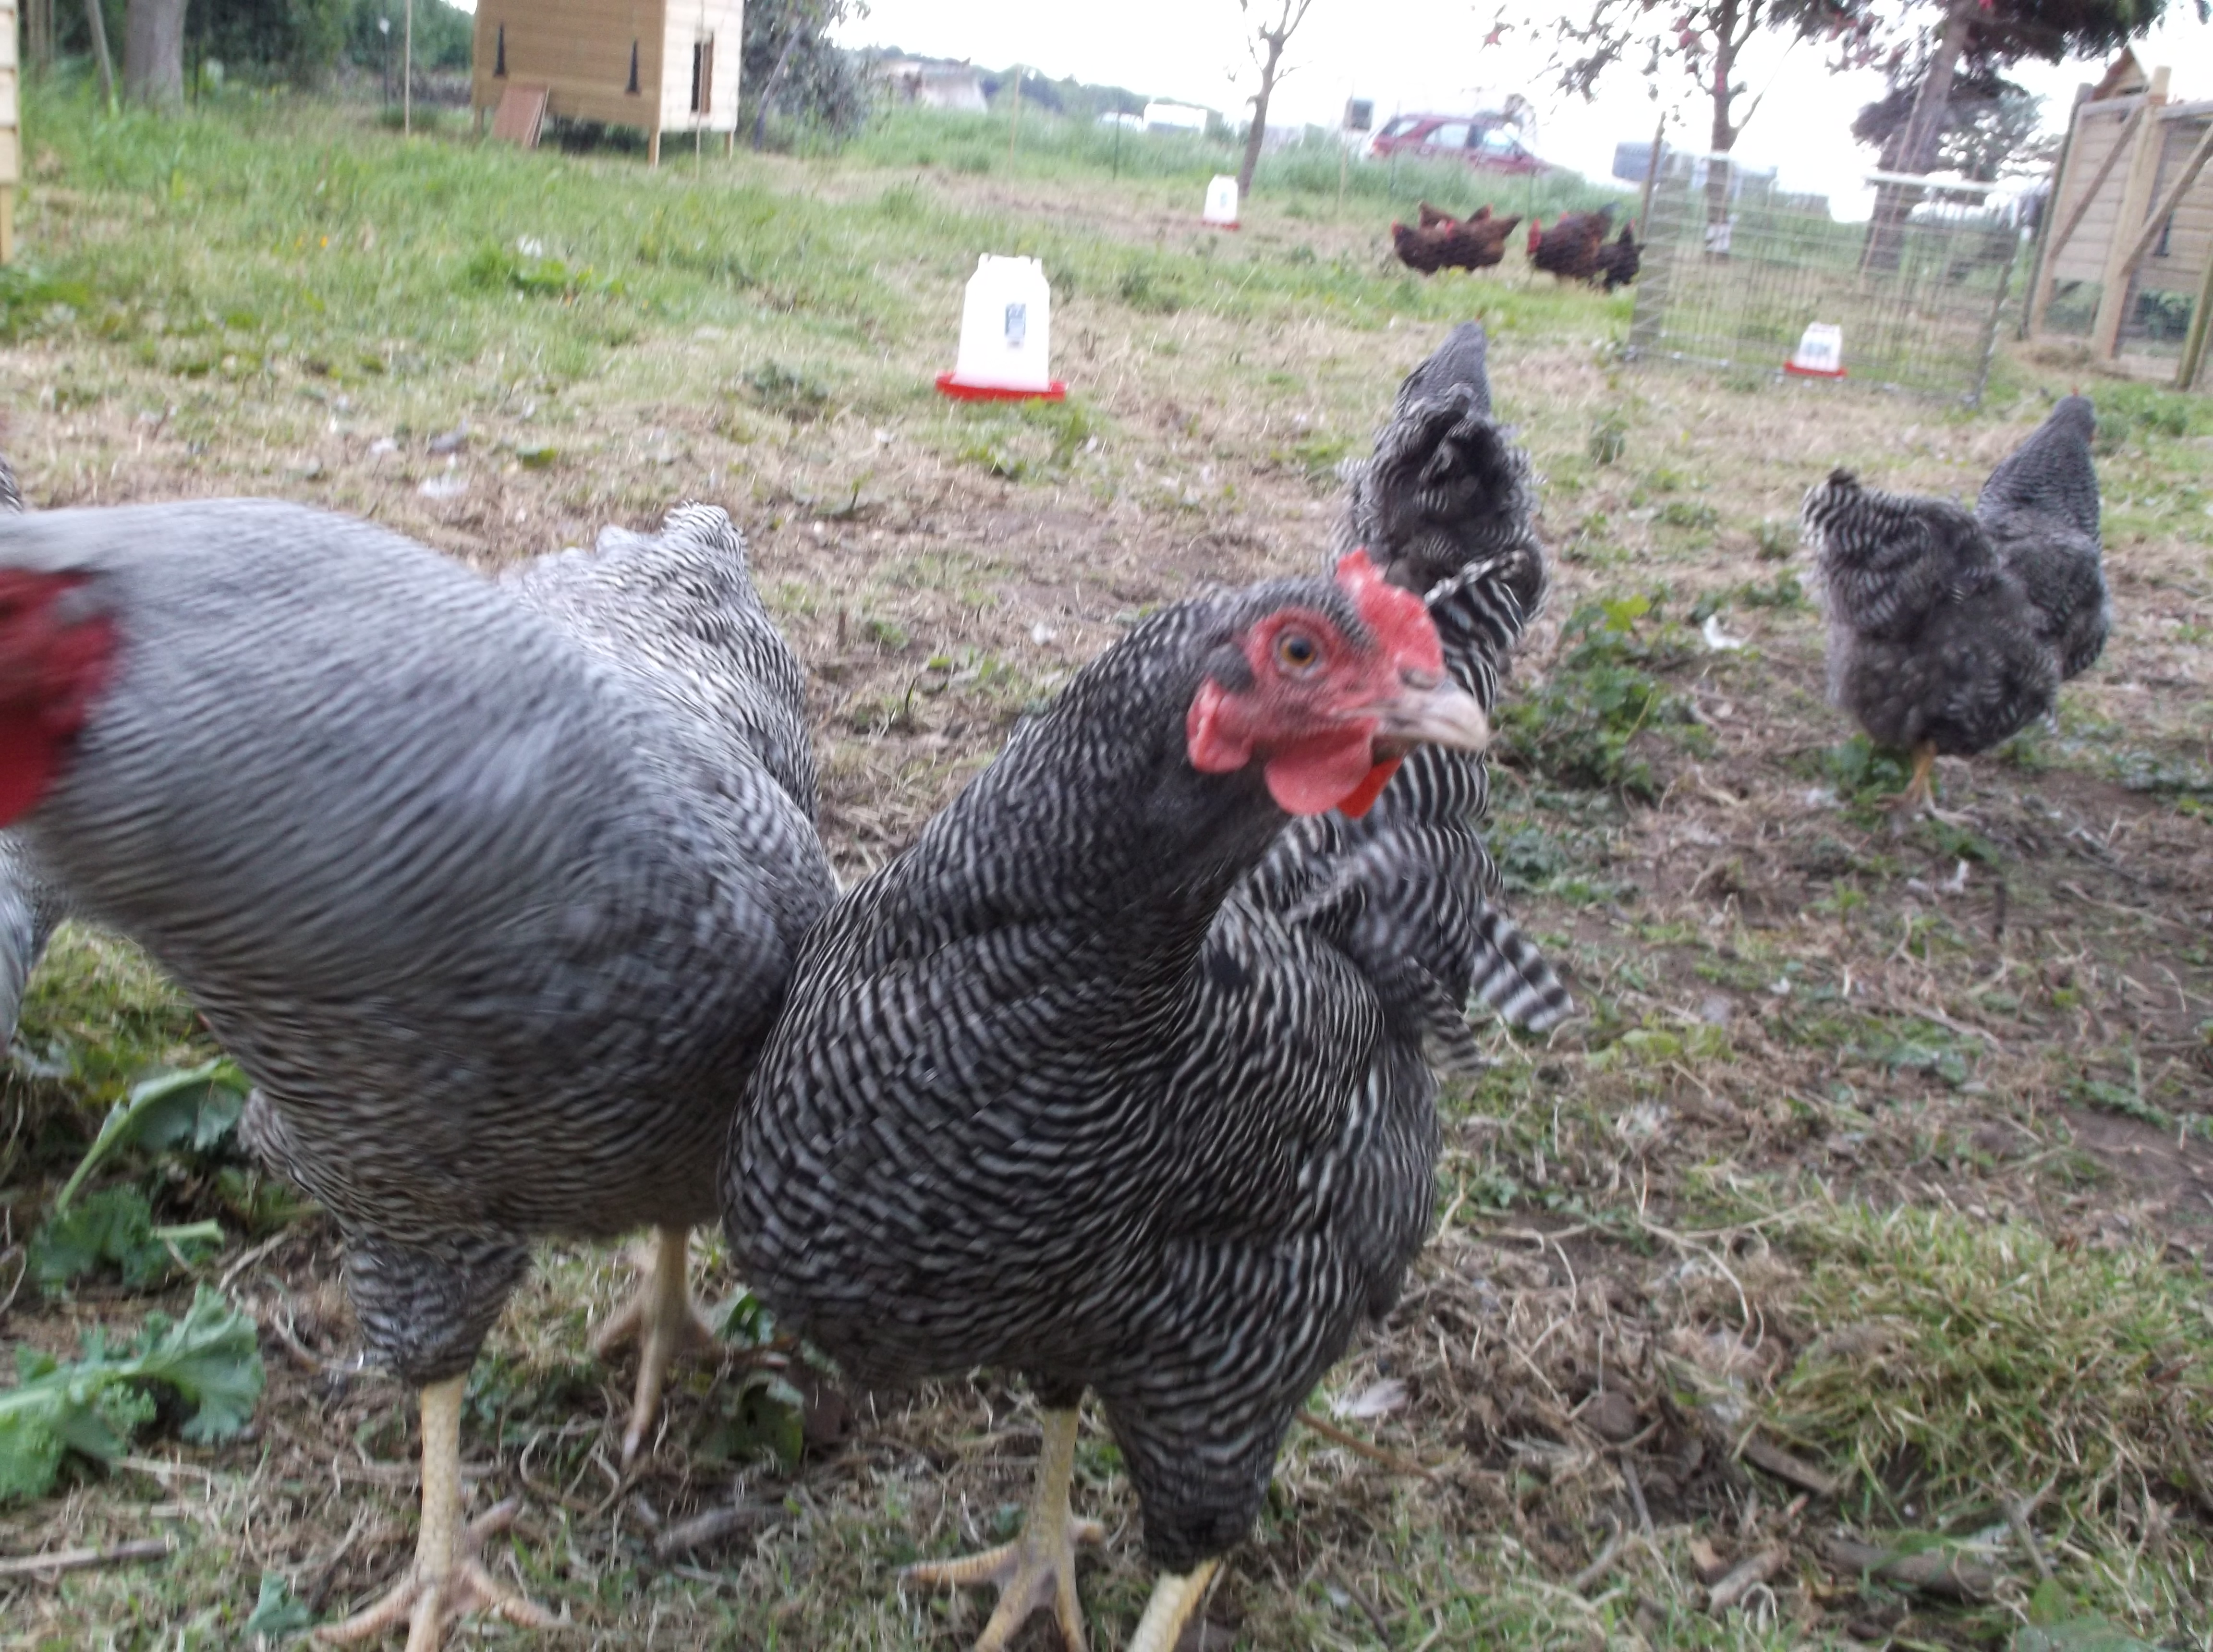 A Barred Rock pullet loving the camera lol.